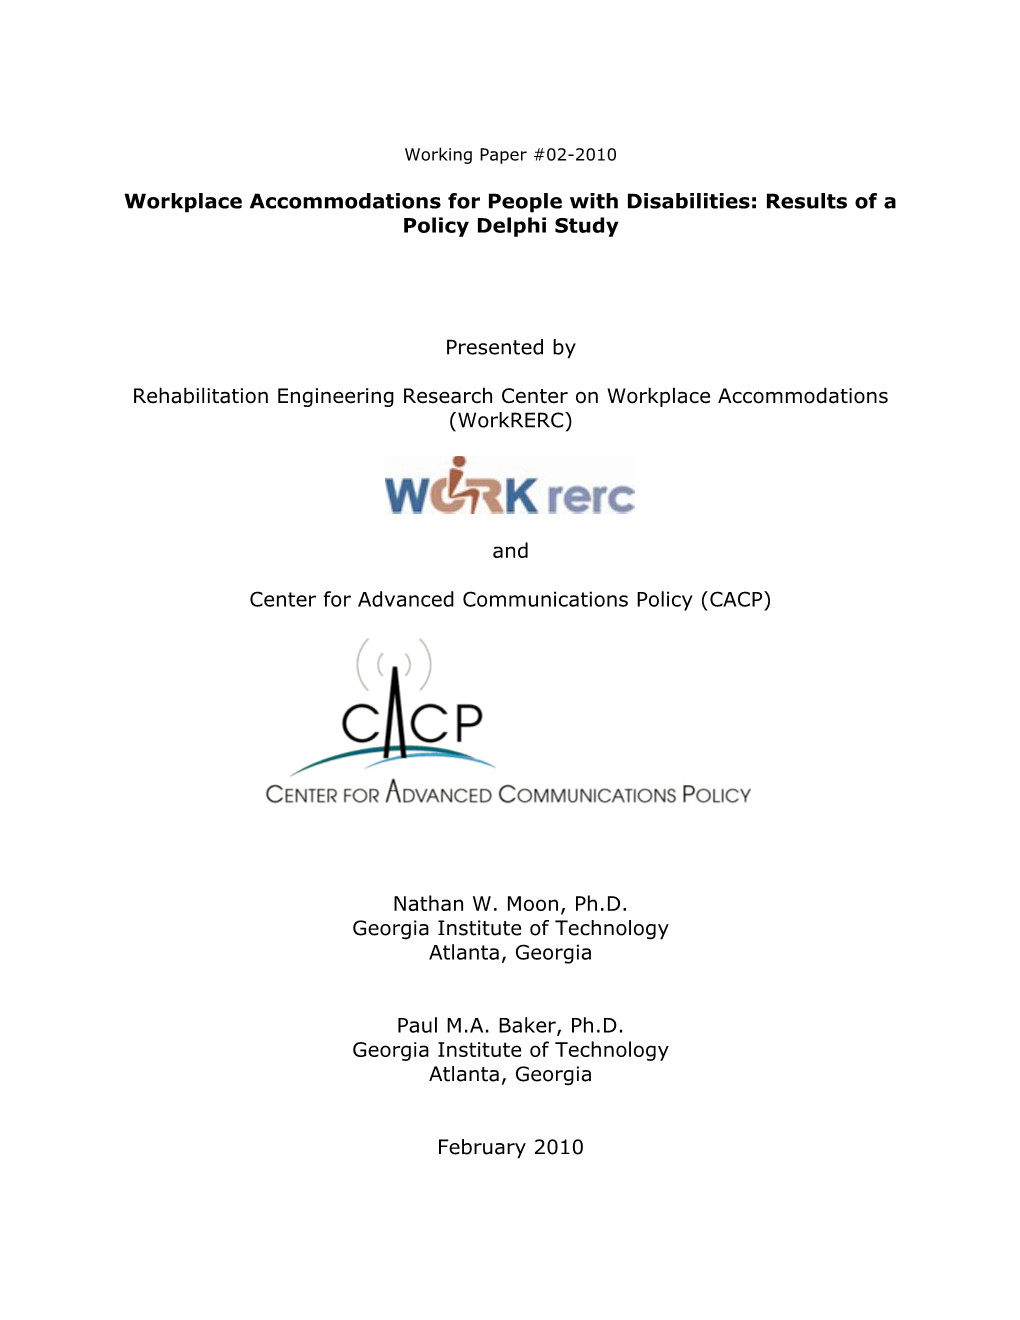 Workplace Accommodations for People with Disabilities: Results of a Policy Delphi Study